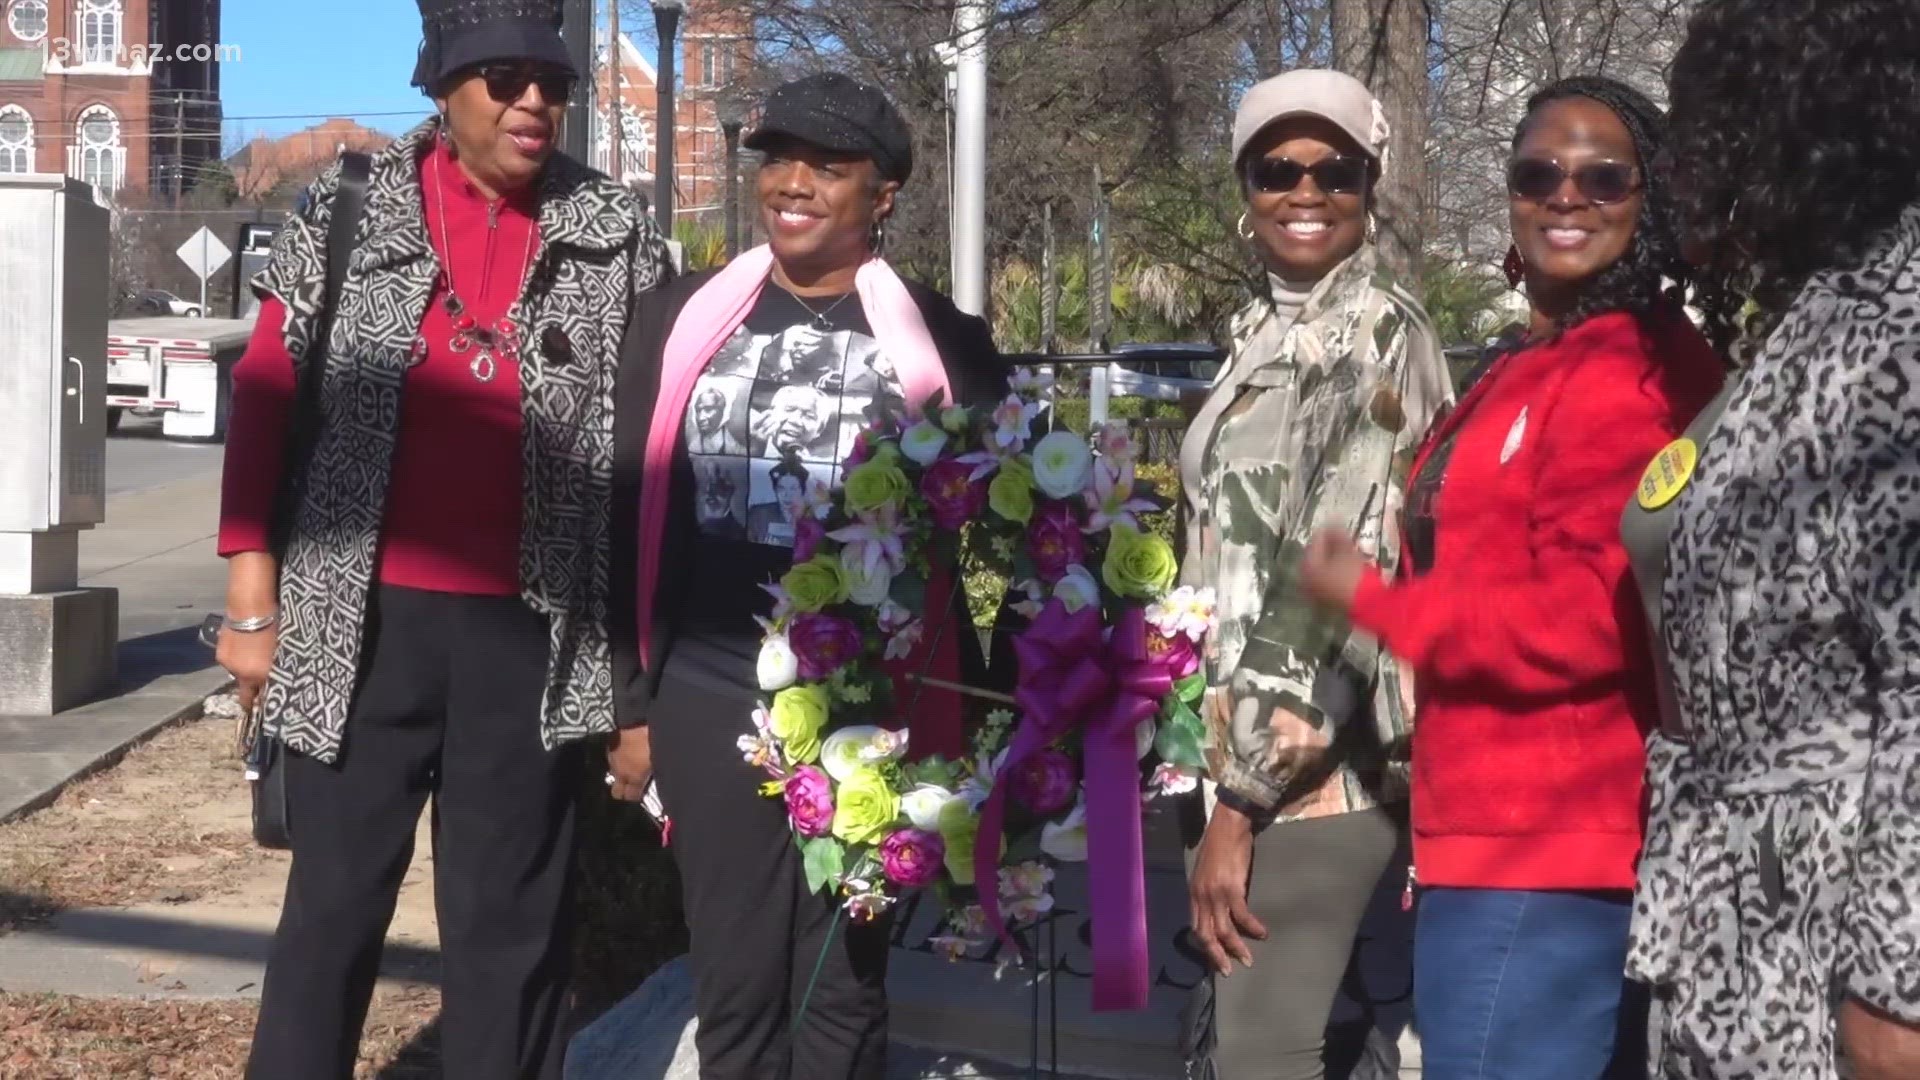 Community leaders and others gathered at Rosa Parks Square to watch the wreath being laid in her memory.